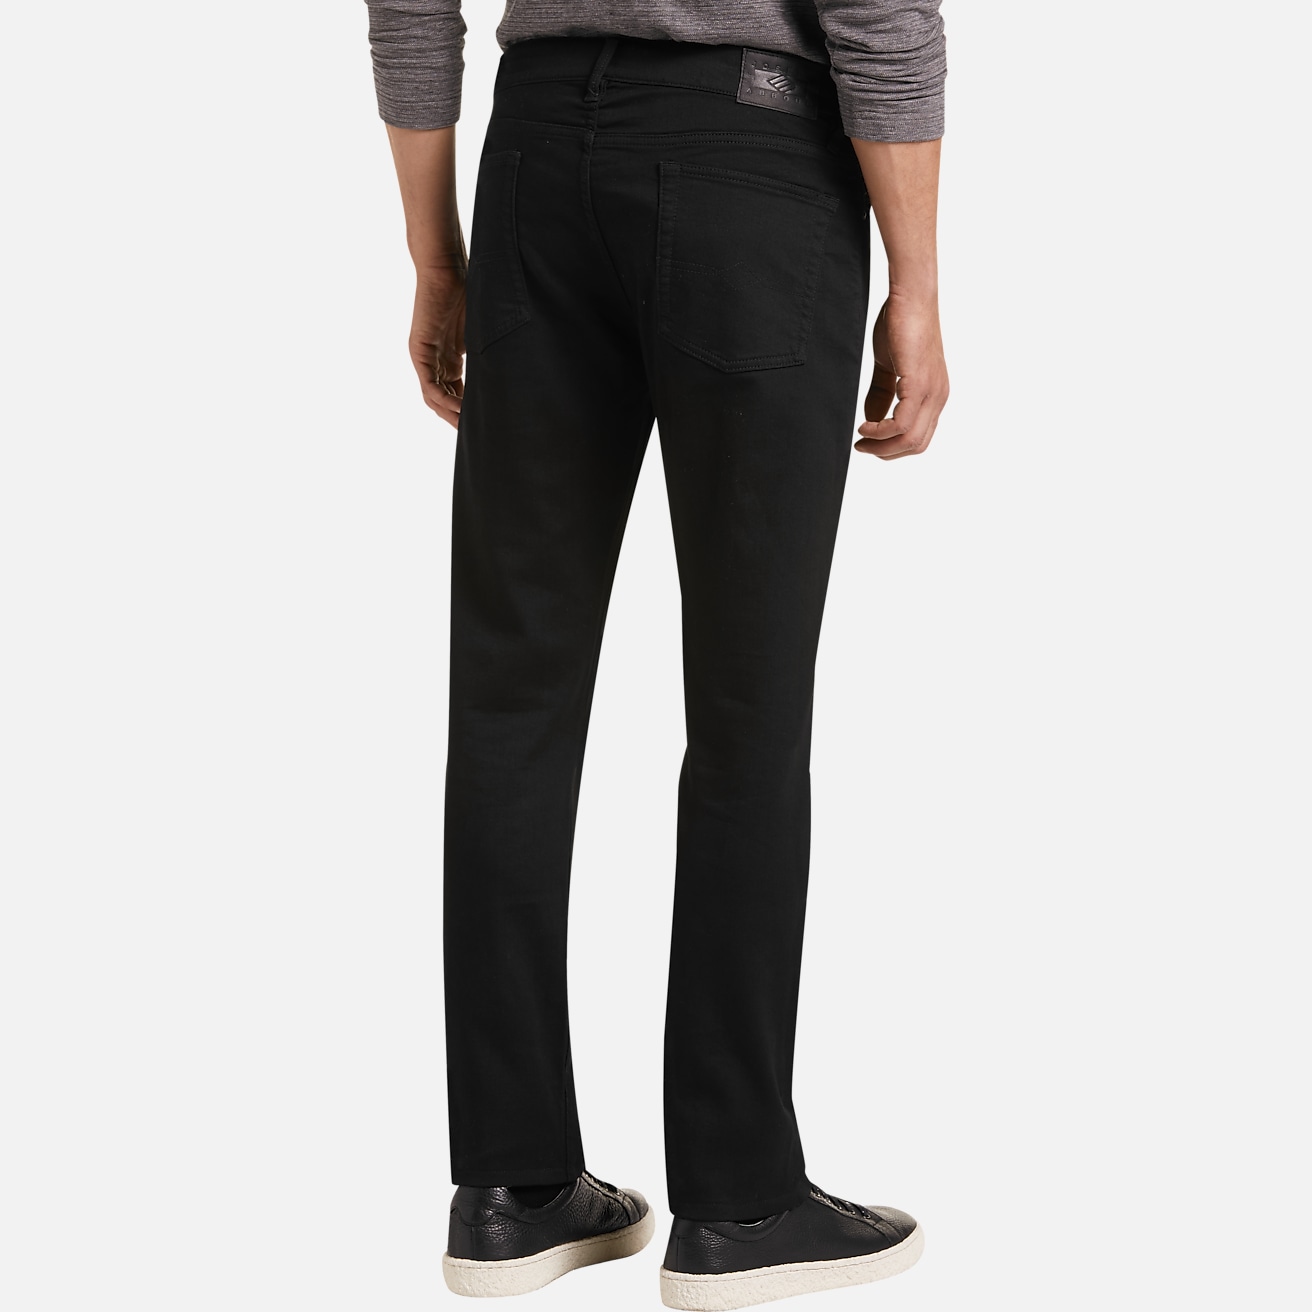 https://image.menswearhouse.com/is/image/TMW/TMW_21H8_54_JOSEPH_ABBOUD_JEANS_BLACK_ALT1?imPolicy=pdp-mob-2x